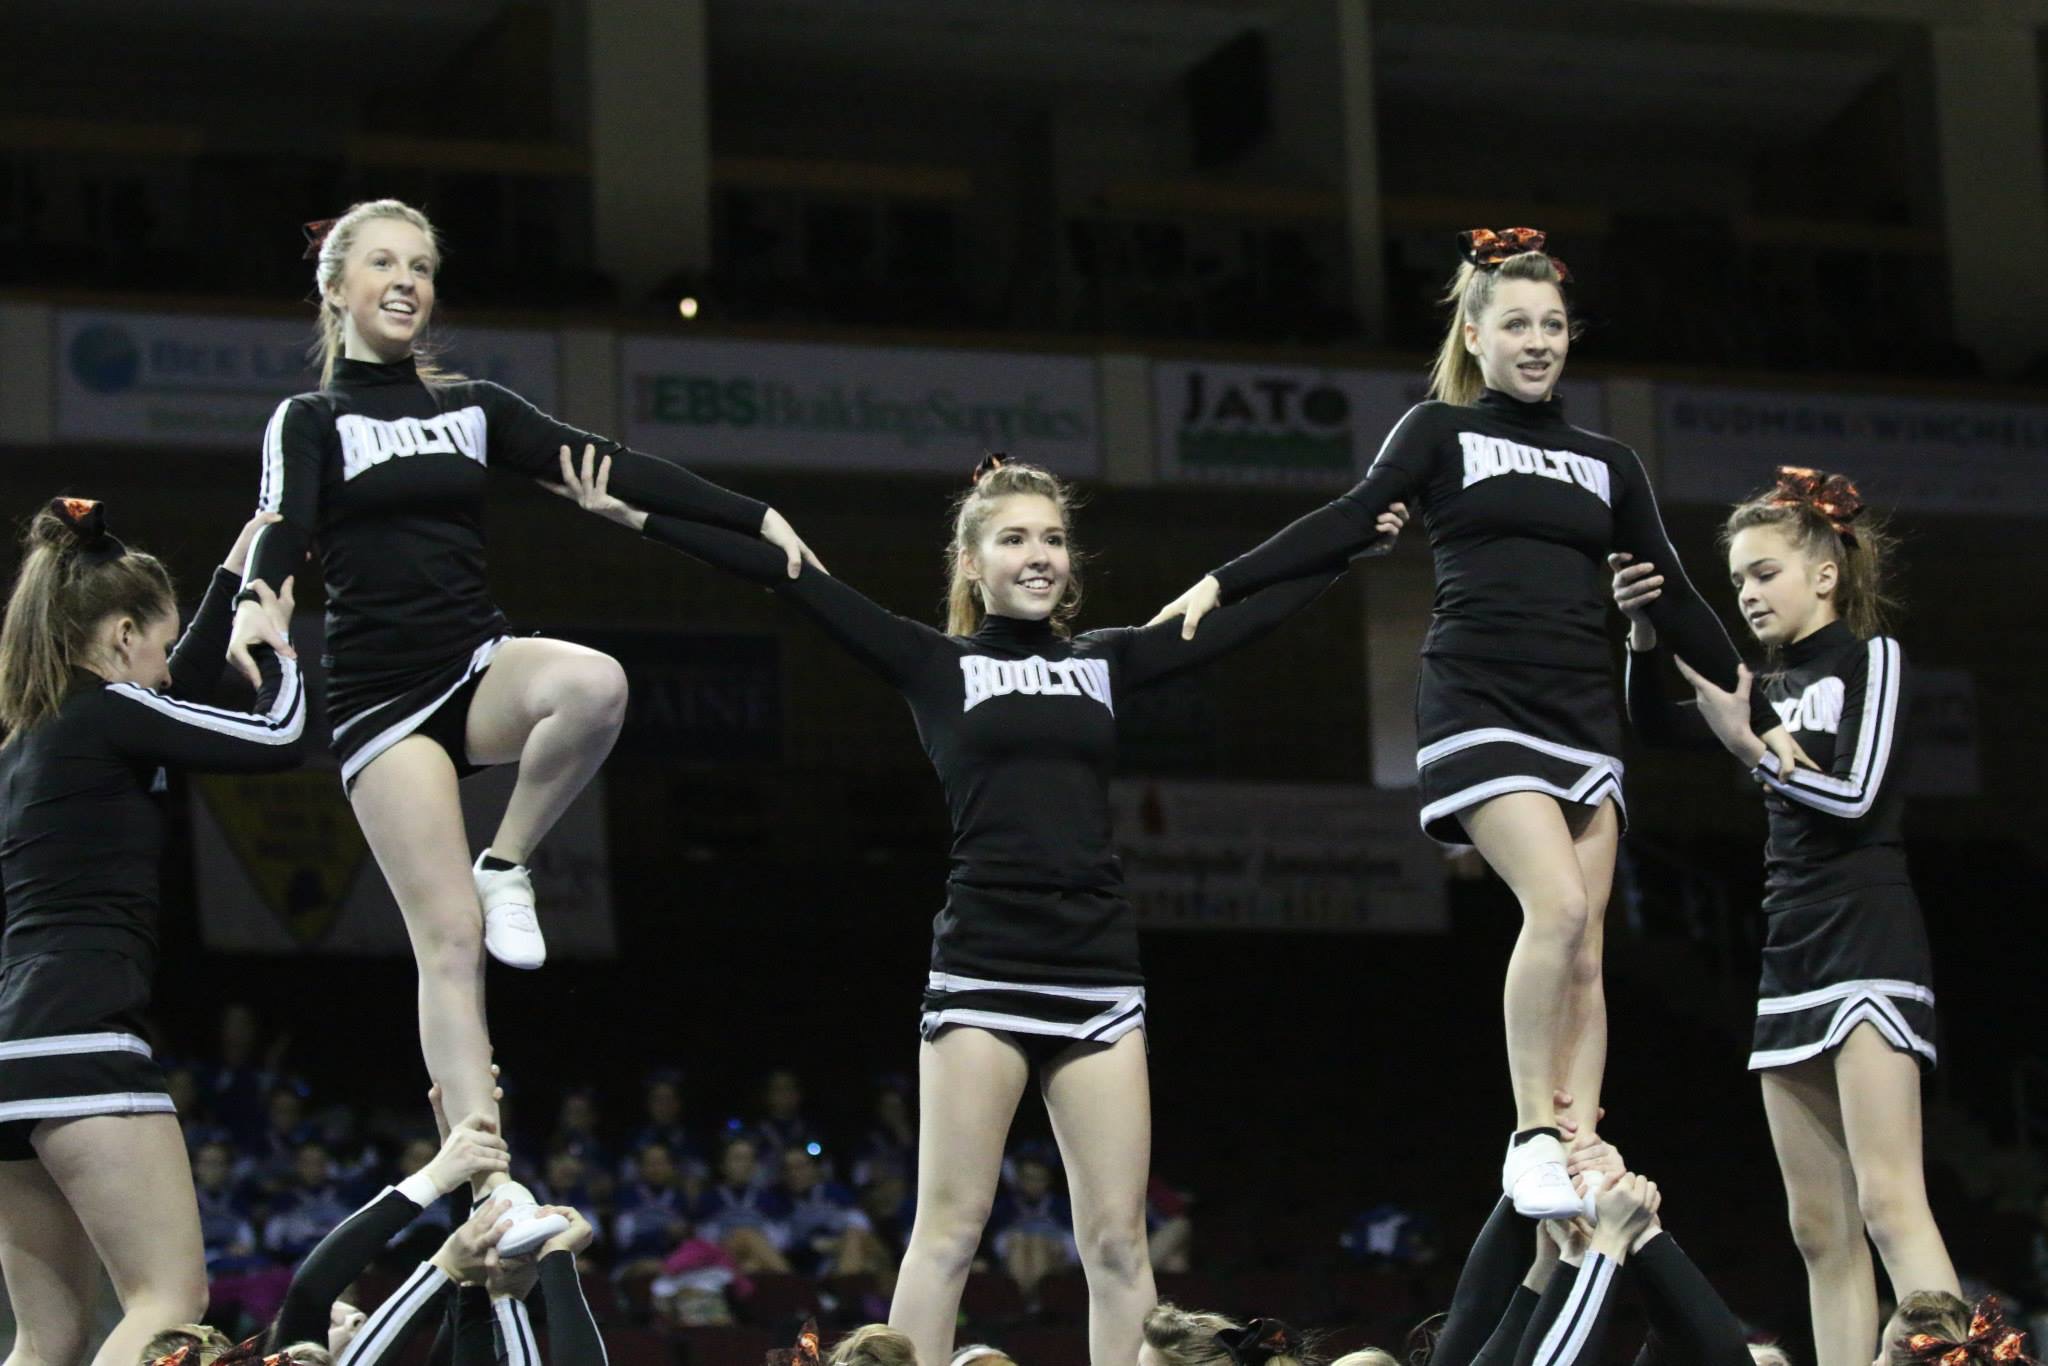 Regional and state cheerleading competition schedule – Eastern Maine Sports